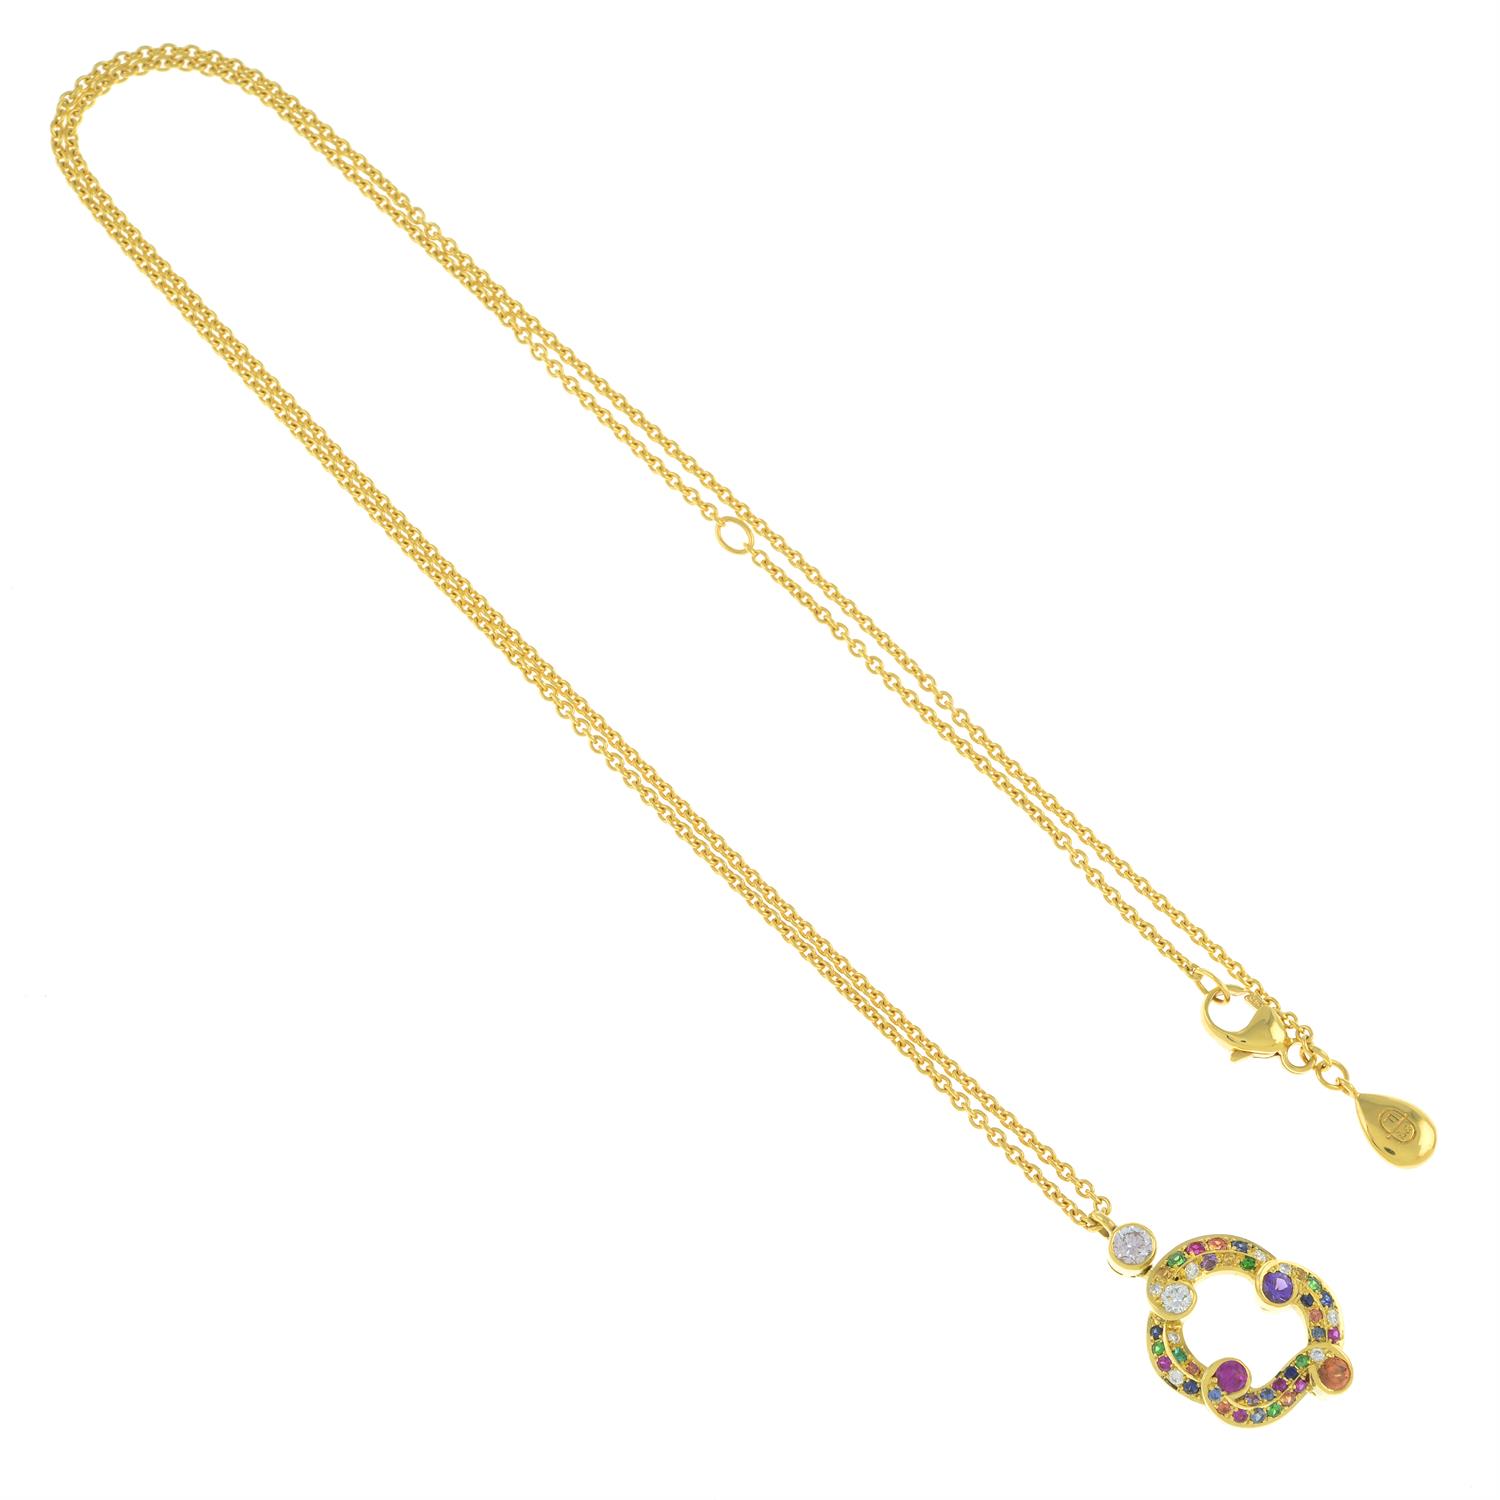 18ct gold gem 'Rococo' necklace, by Fabergé - Image 5 of 6